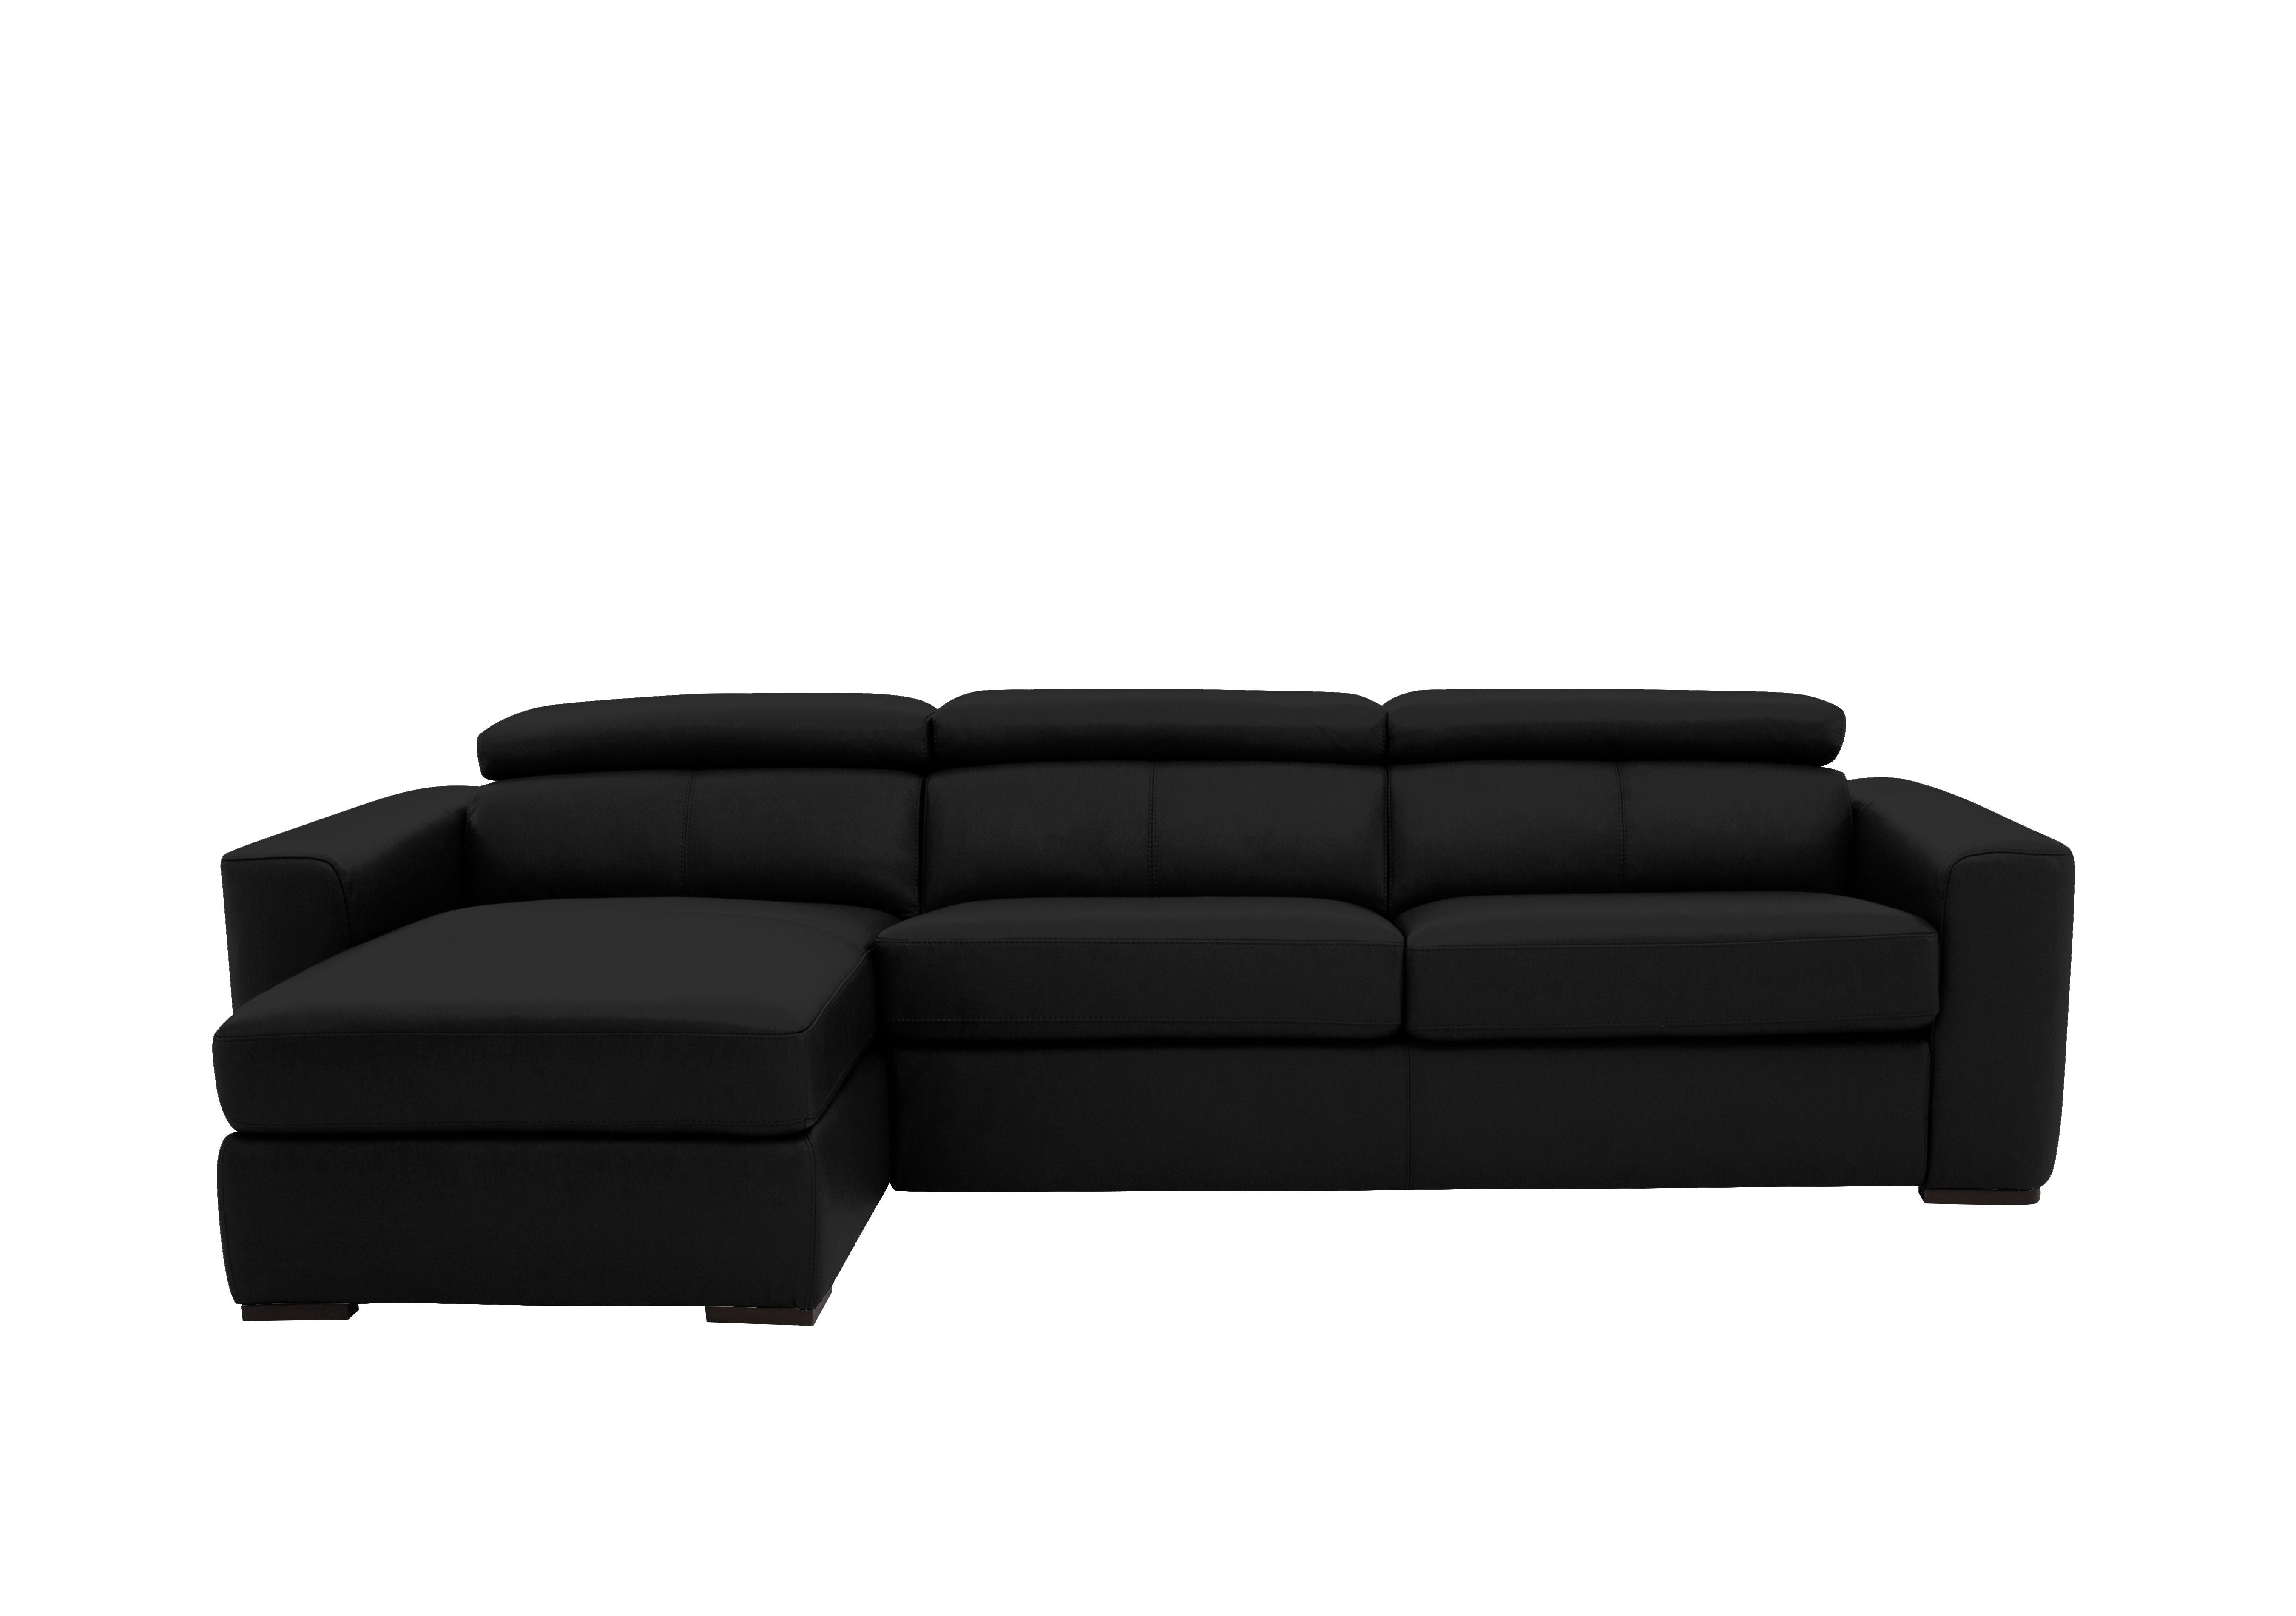 Infinity Leather Corner Chaise Sofabed with Storage in Bv-3500 Classic Black on Furniture Village